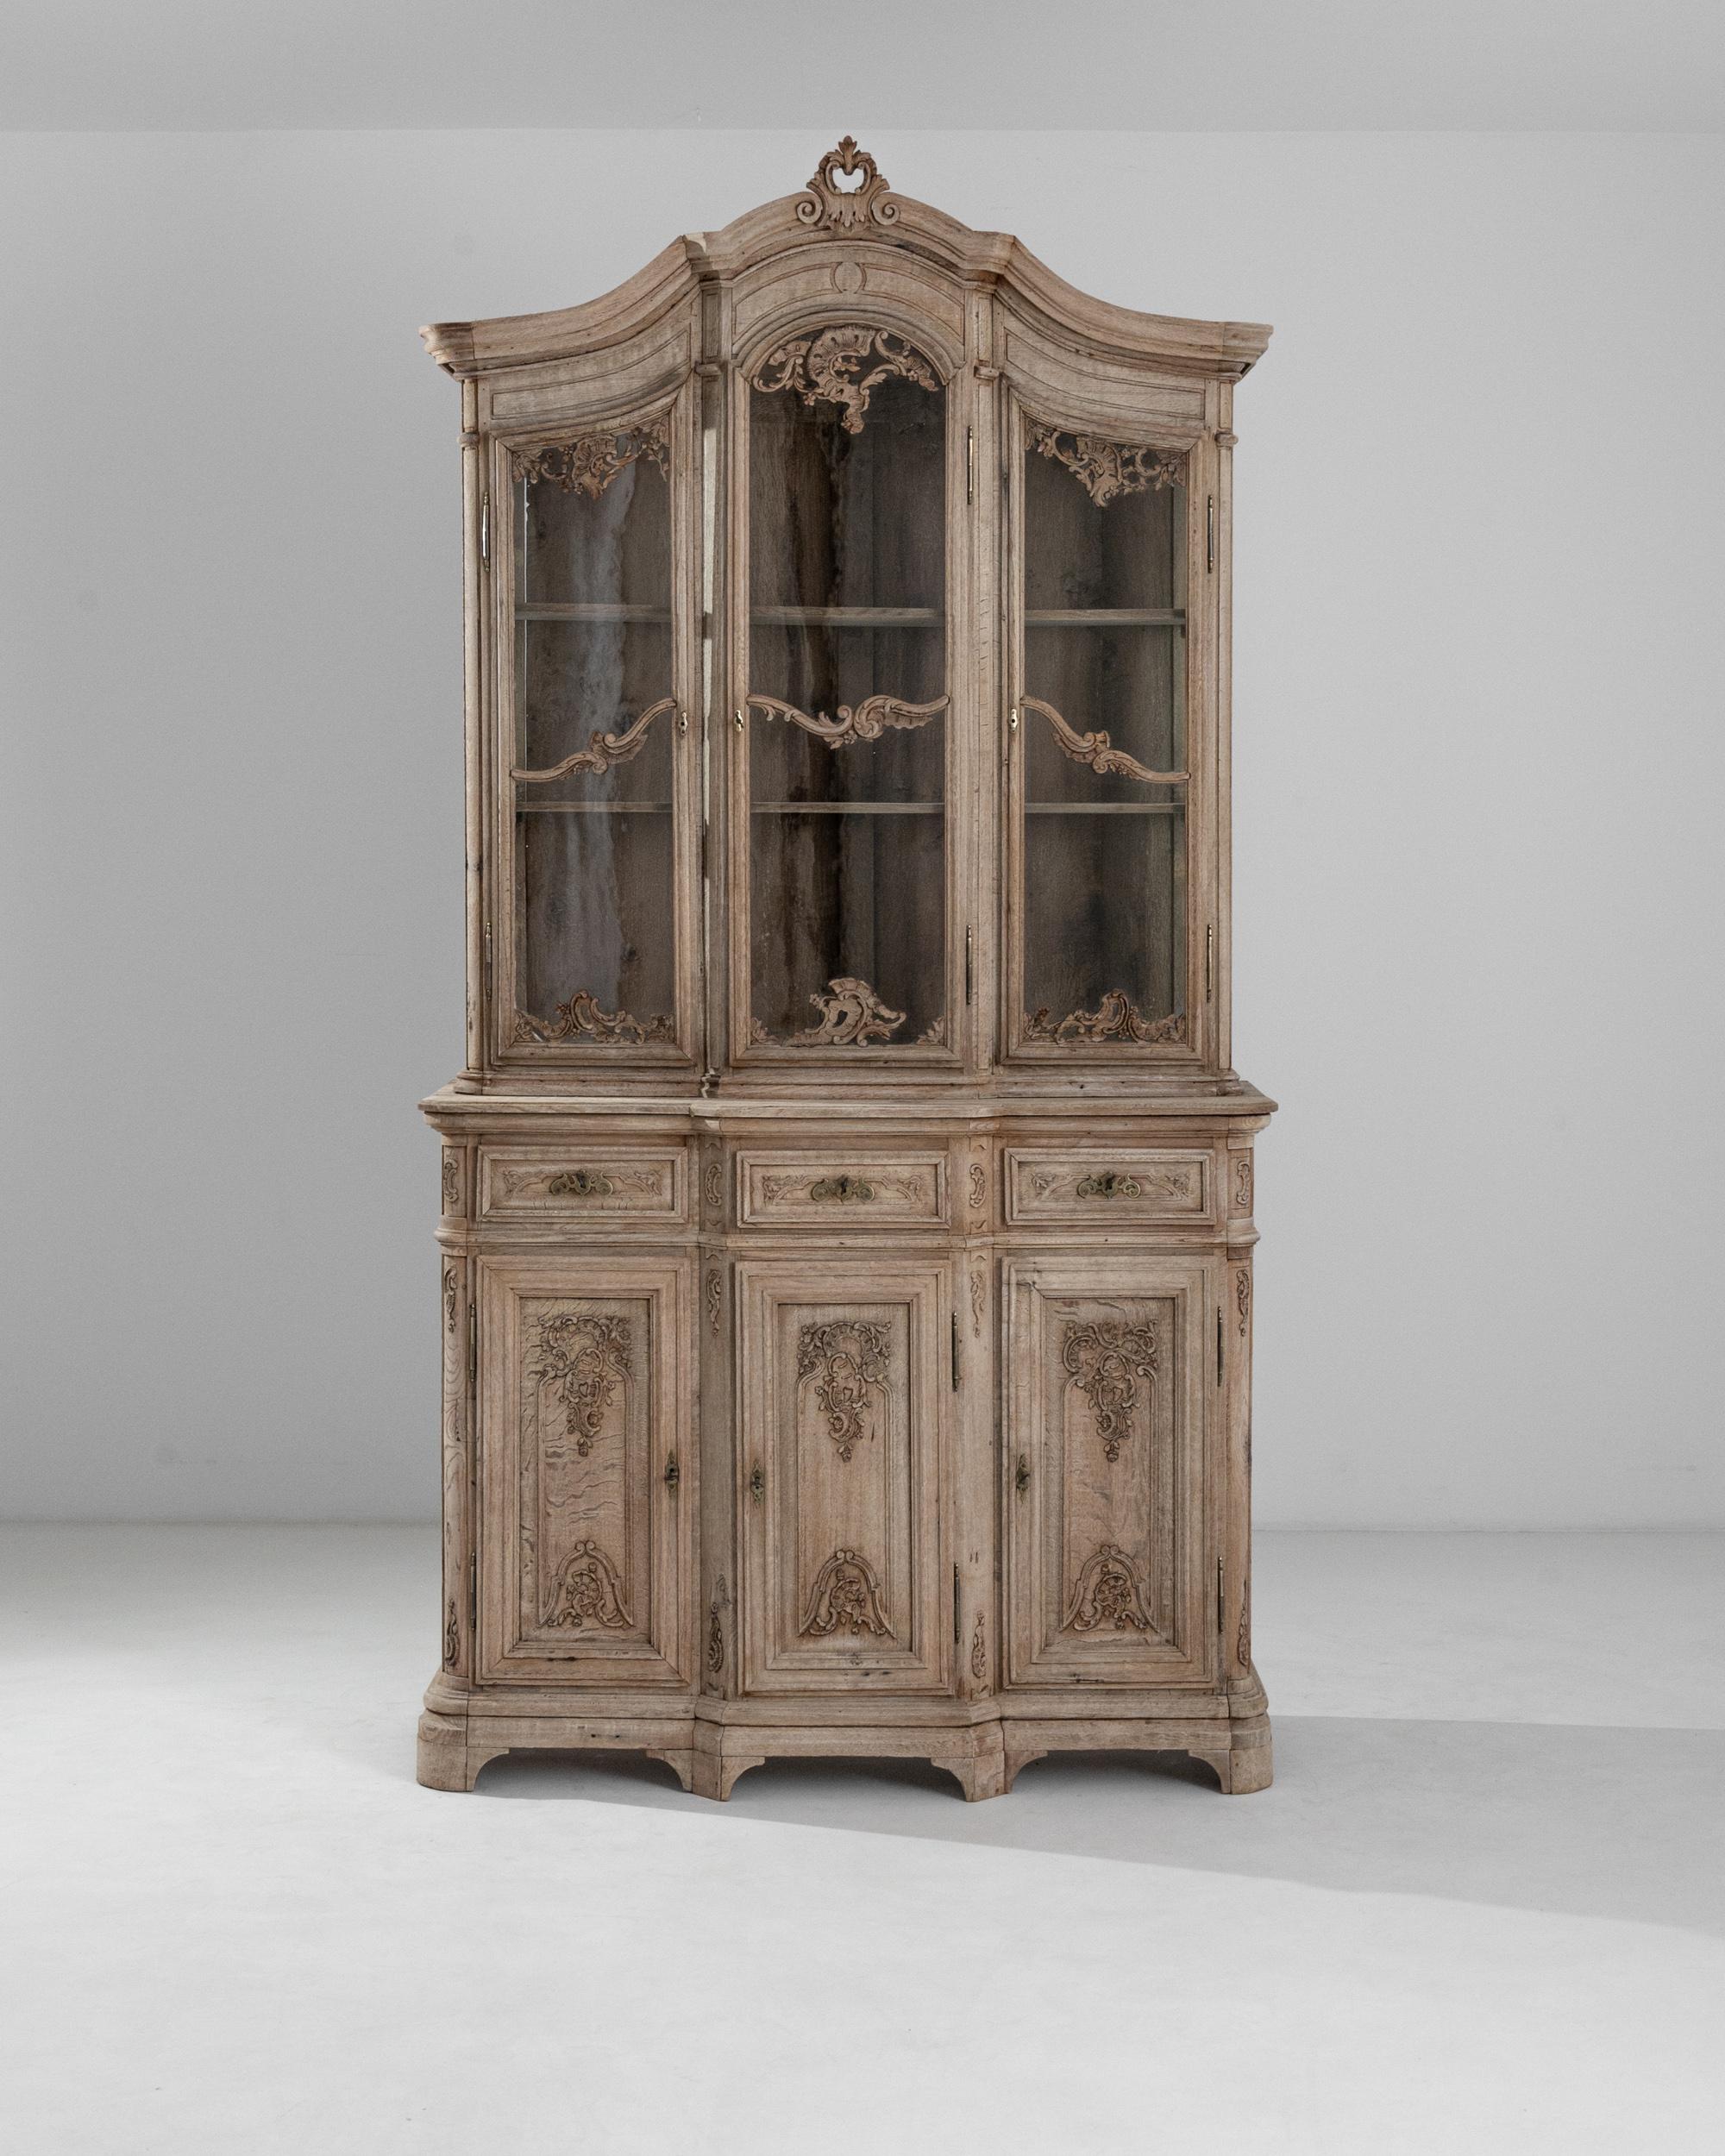 The exquisite carved accents which adorn this antique rococo vitrine create an impression of effervescent spontaneity. Built in Belgium in the 19th century, the piece is distinguished by the flourishes of leaves and flowers which appear to overflow